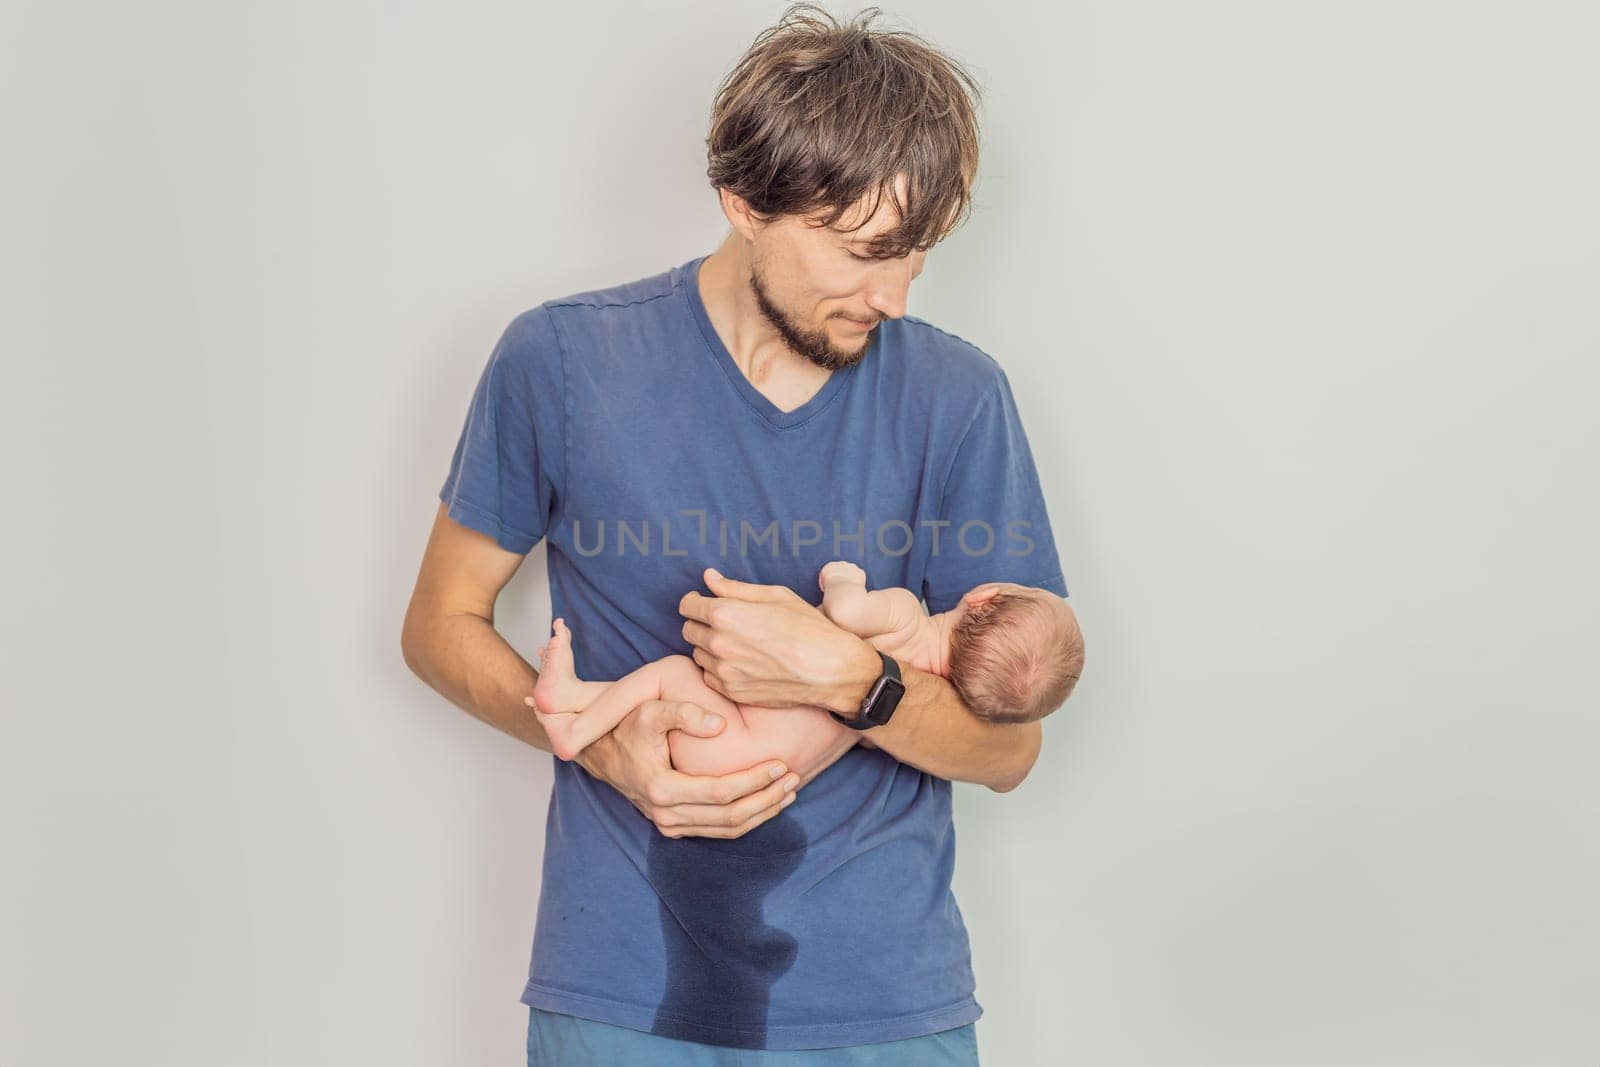 Dad holds newborn and newborn peed on dad. This humorous and heartwarming moment captures the realities of parenting and the bond between father and child in a candid family setting by galitskaya